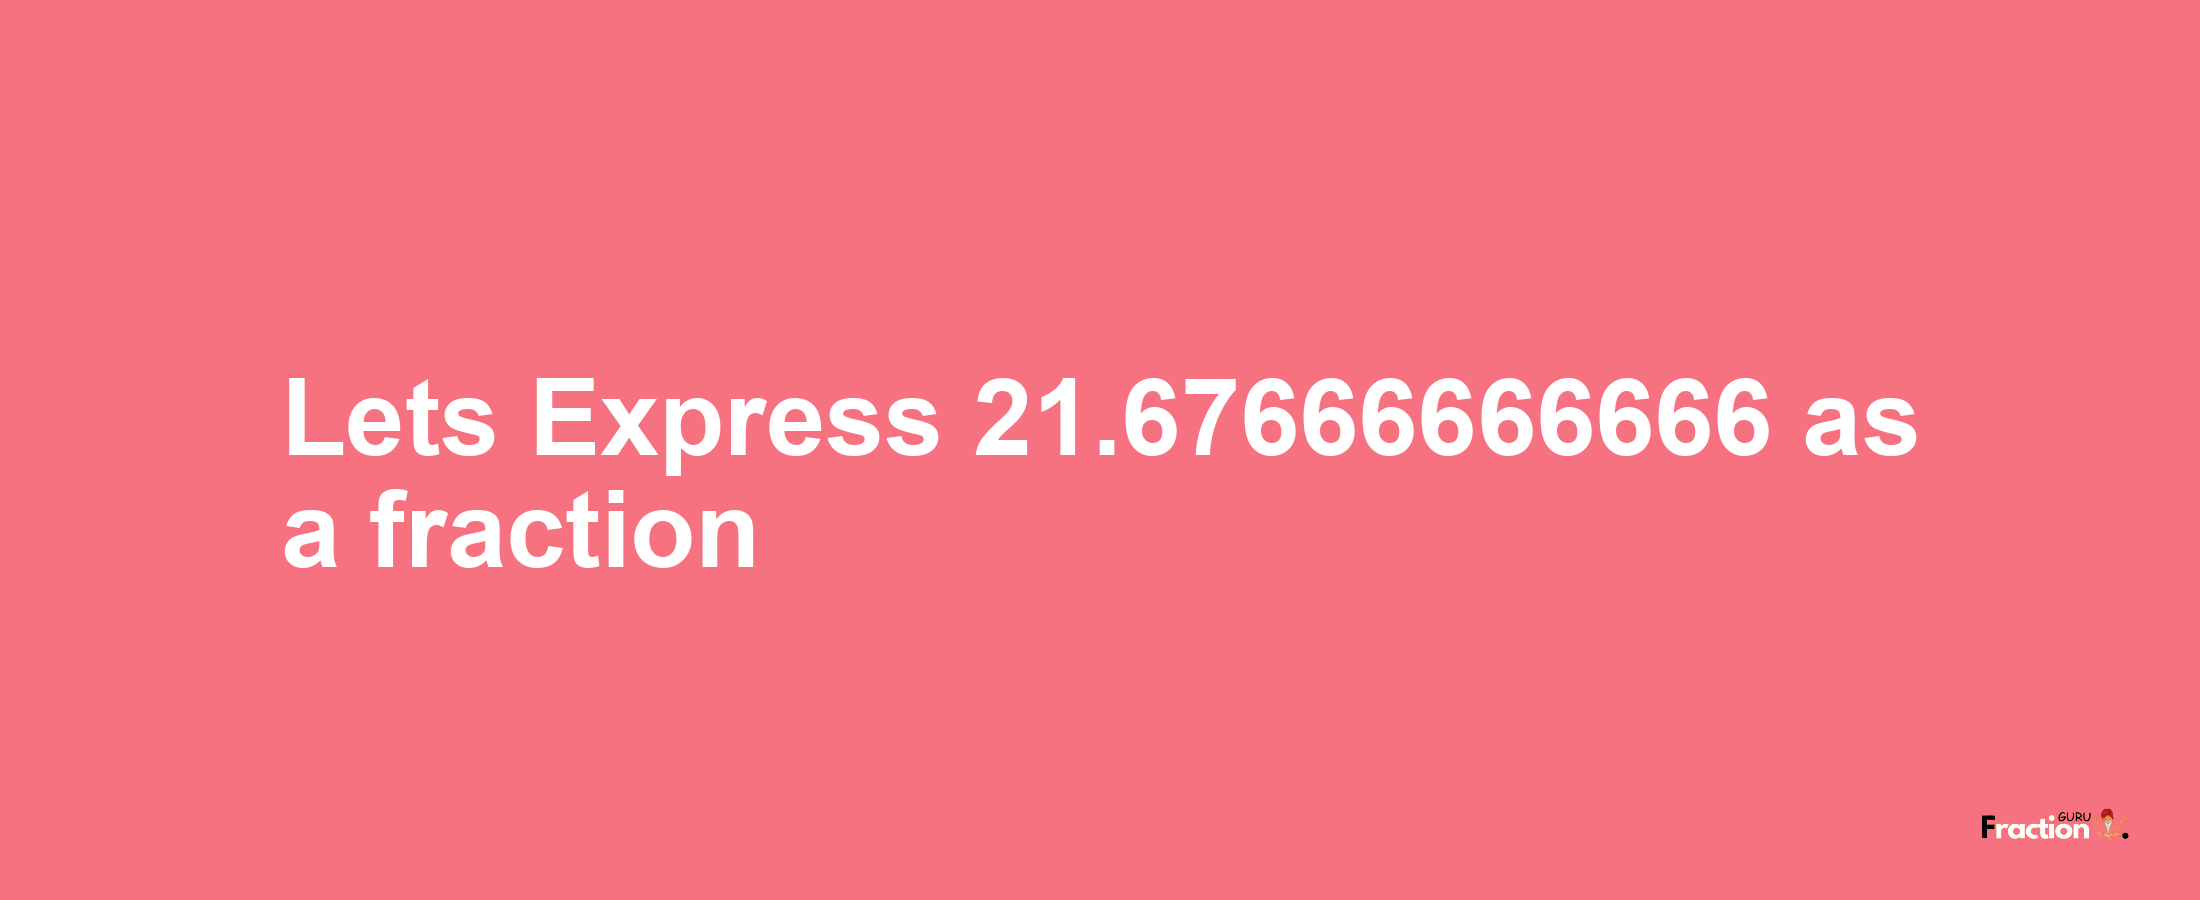 Lets Express 21.67666666666 as afraction